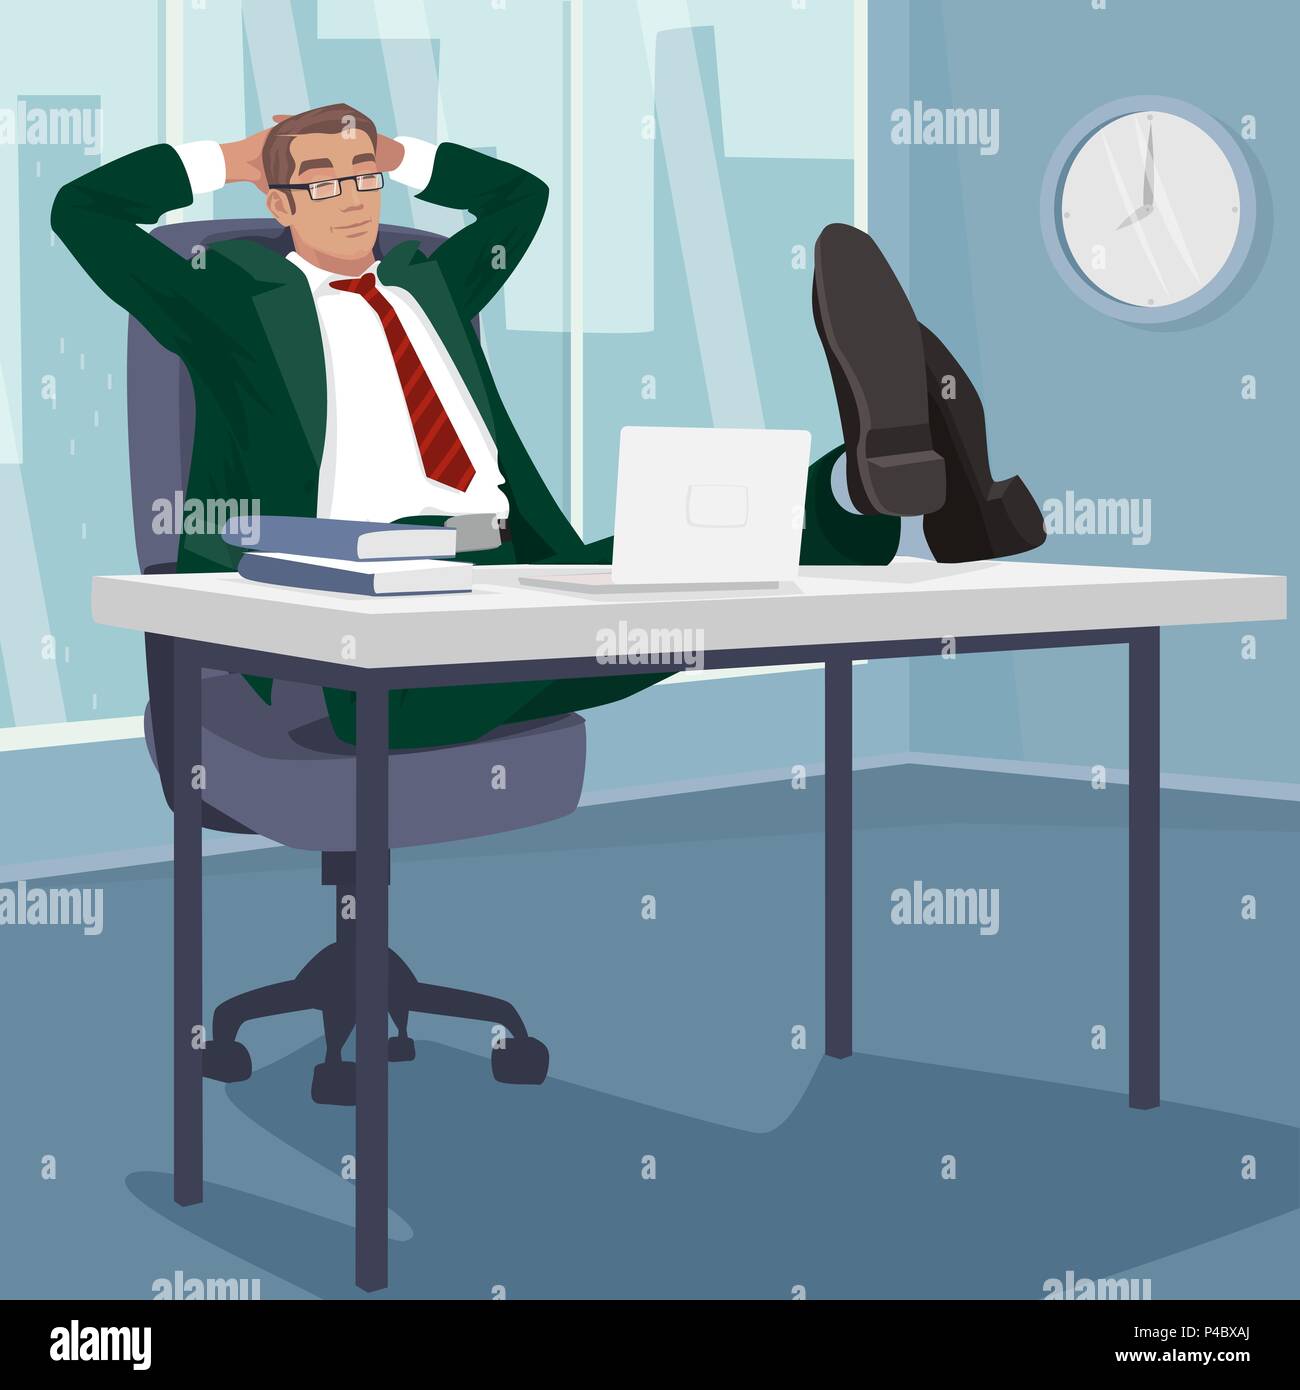 Carefree businessman or manager relaxed in workplace. Man sleeps at table in modern office. Break or Siesta concept. Simplistic realistic style Stock Vector